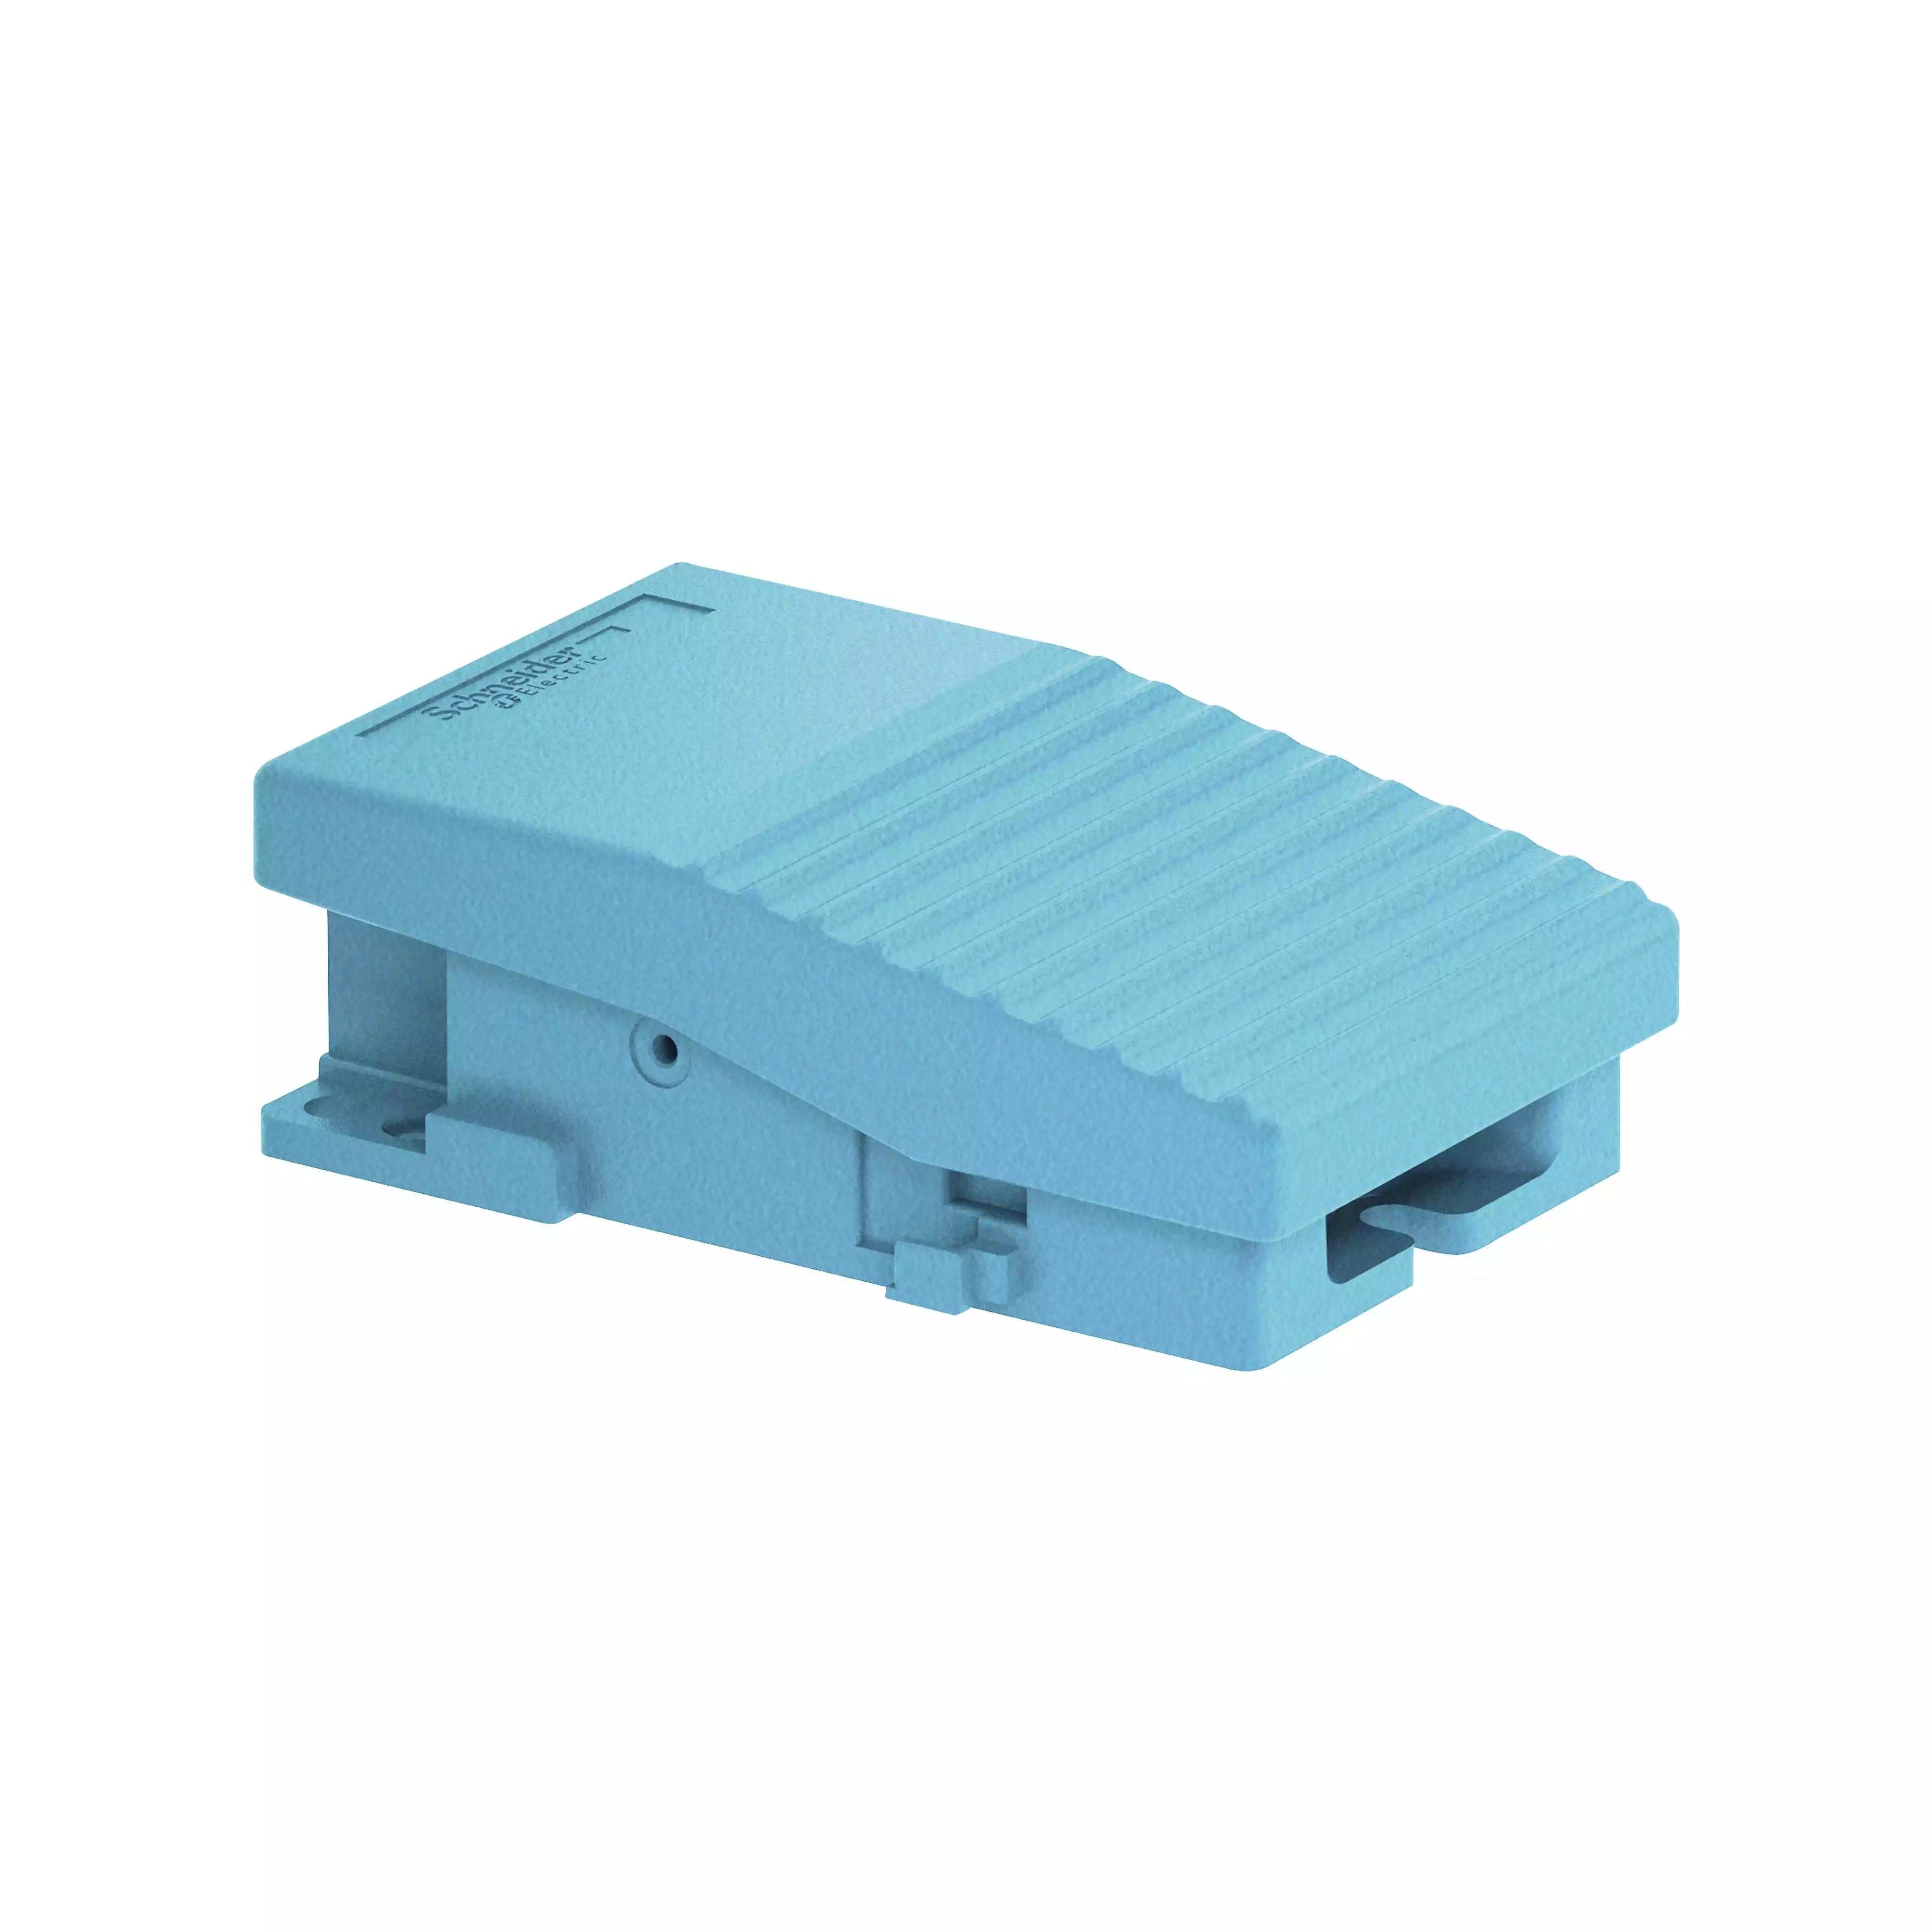 single foot switch - IP66 - without cover - metallic - blue - 1 NC + 1 NO